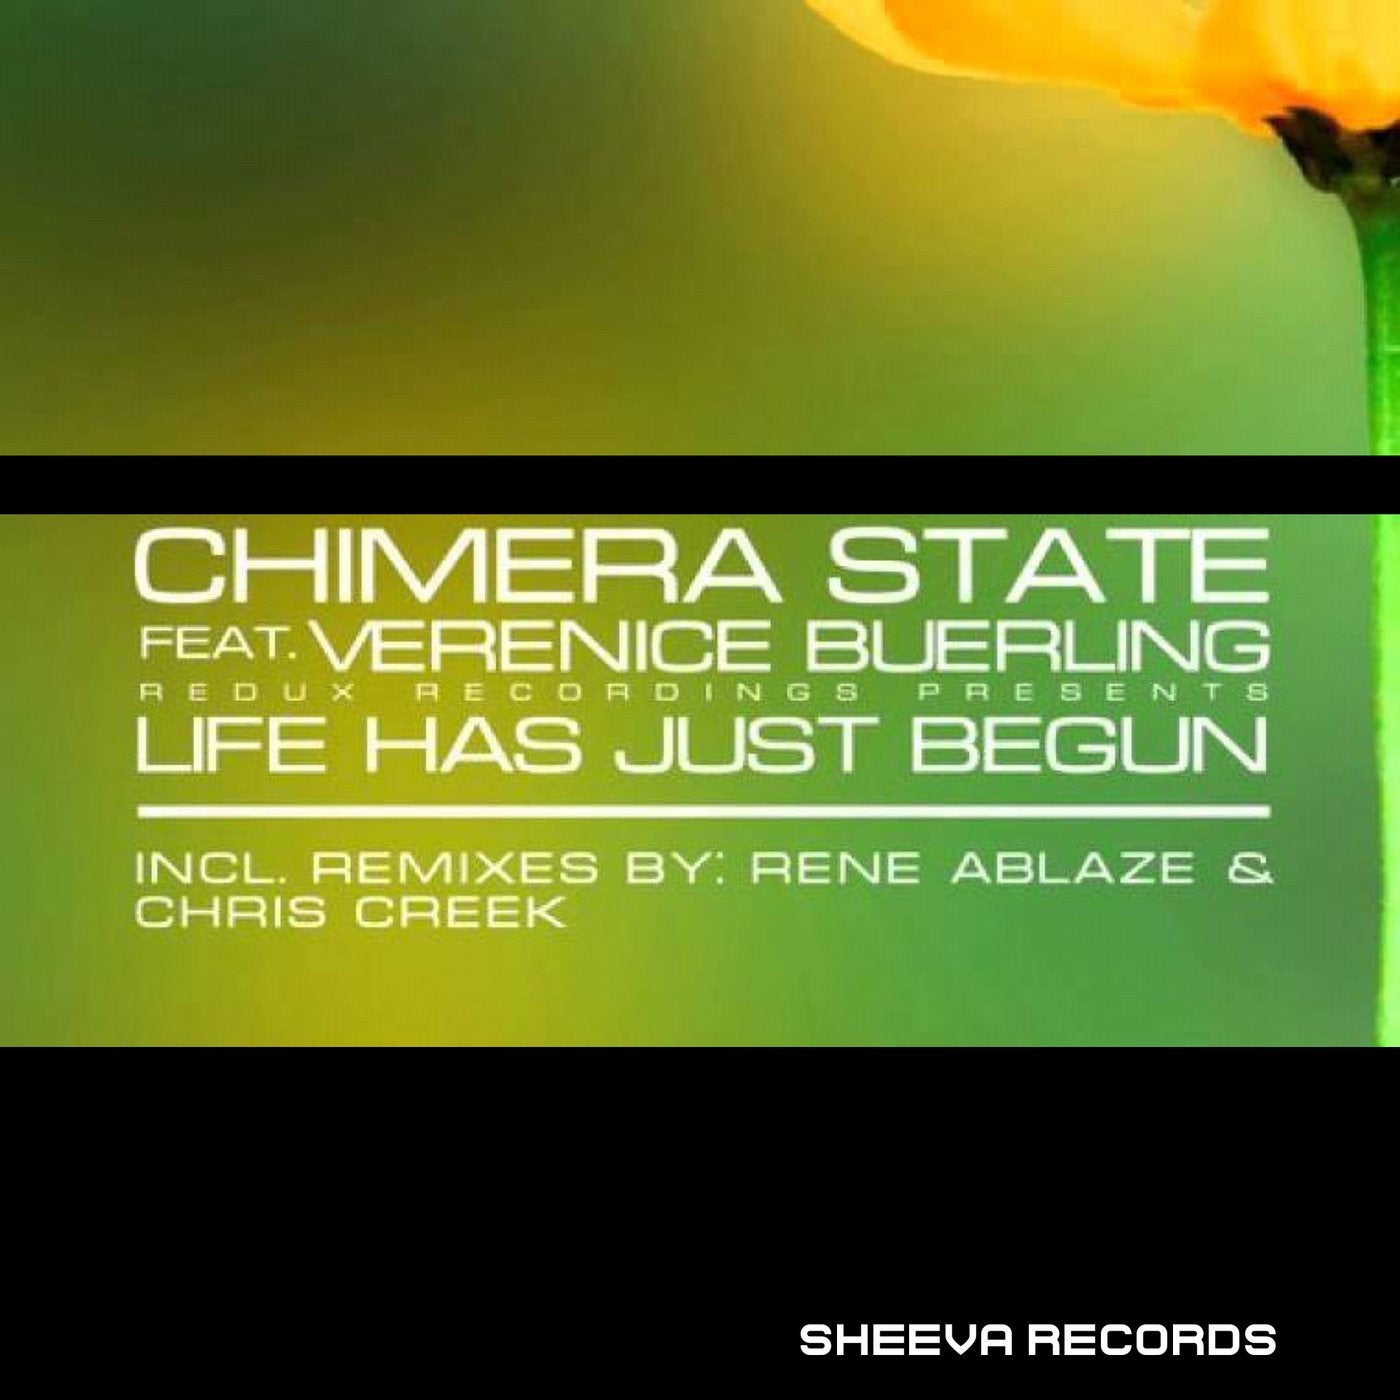 Chimera State Feat. Verenice Buerling Life Has Just Begun